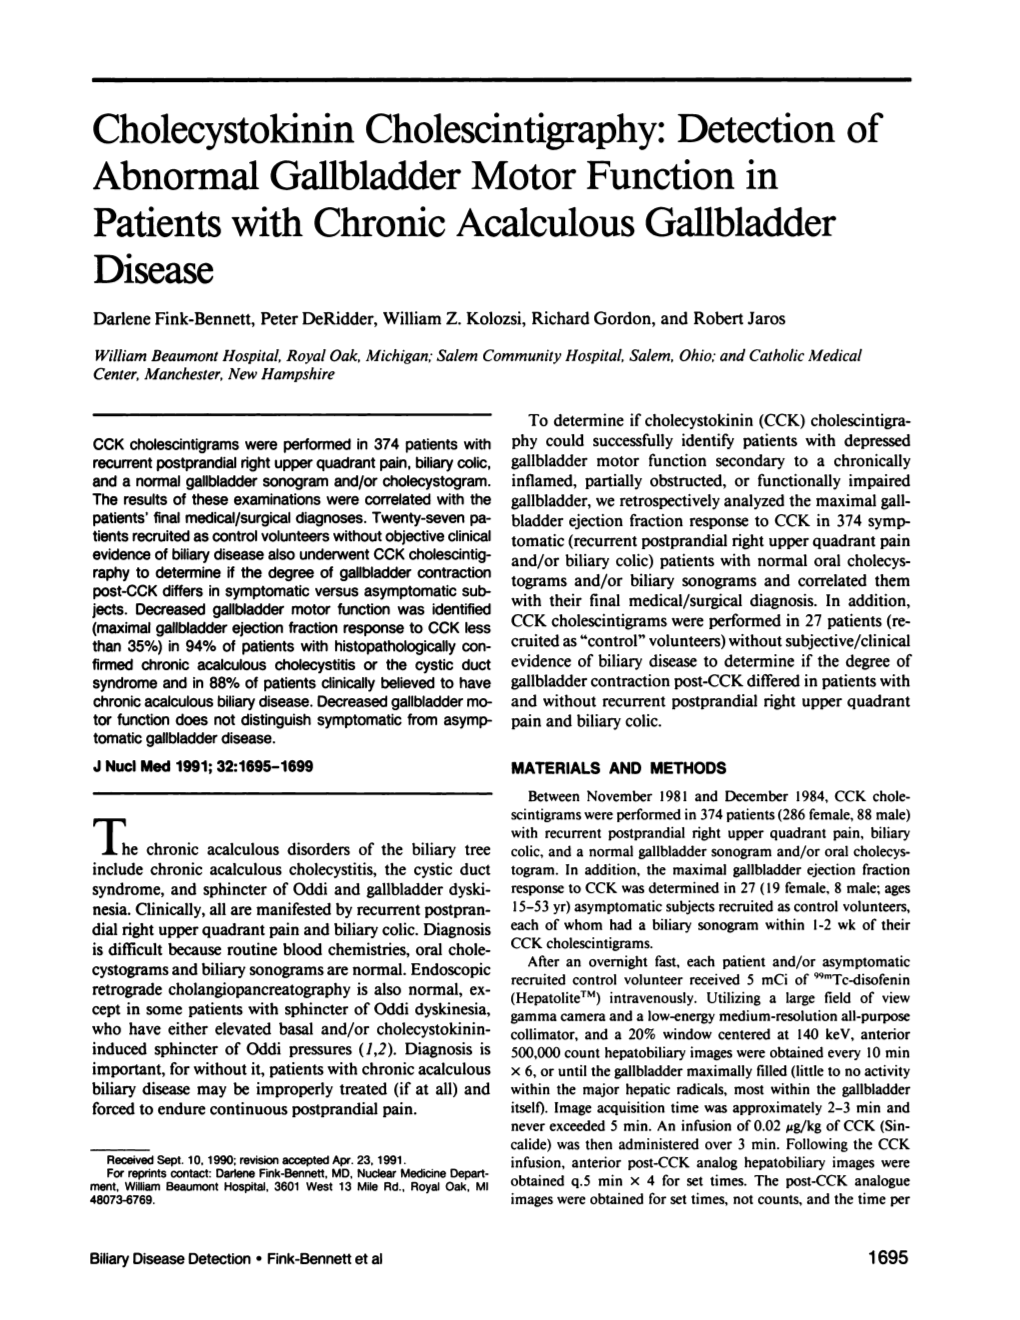 Abnormal Gallbladder Motor Function in Patients with Chronic Acalculous Gallbladder Disease